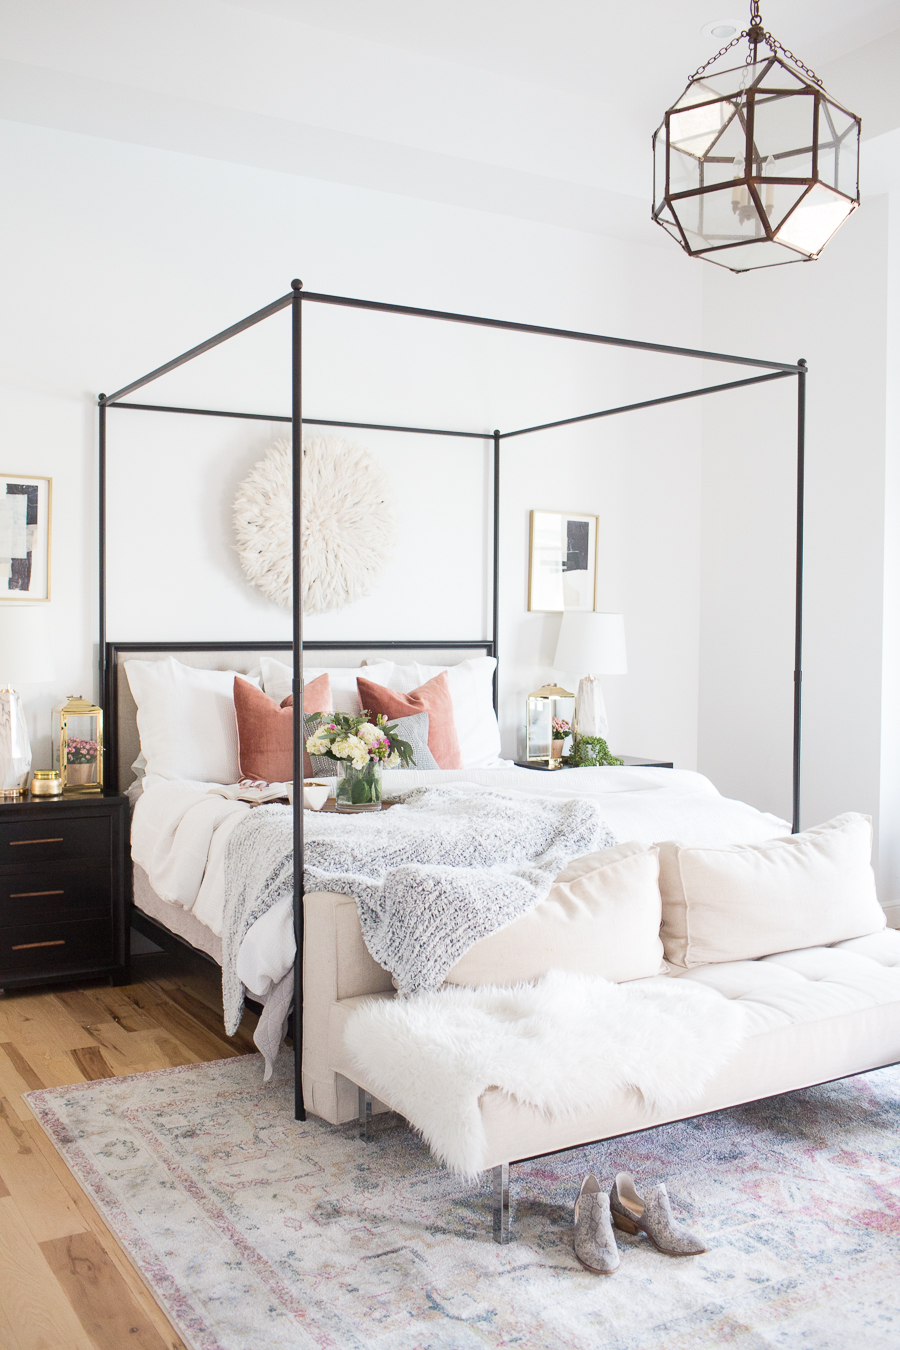 Refresh Your Master Bedroom and Bath with Pottery Barn black canopy bed with whites and pastel colors used in the pillows, bedding, and bench